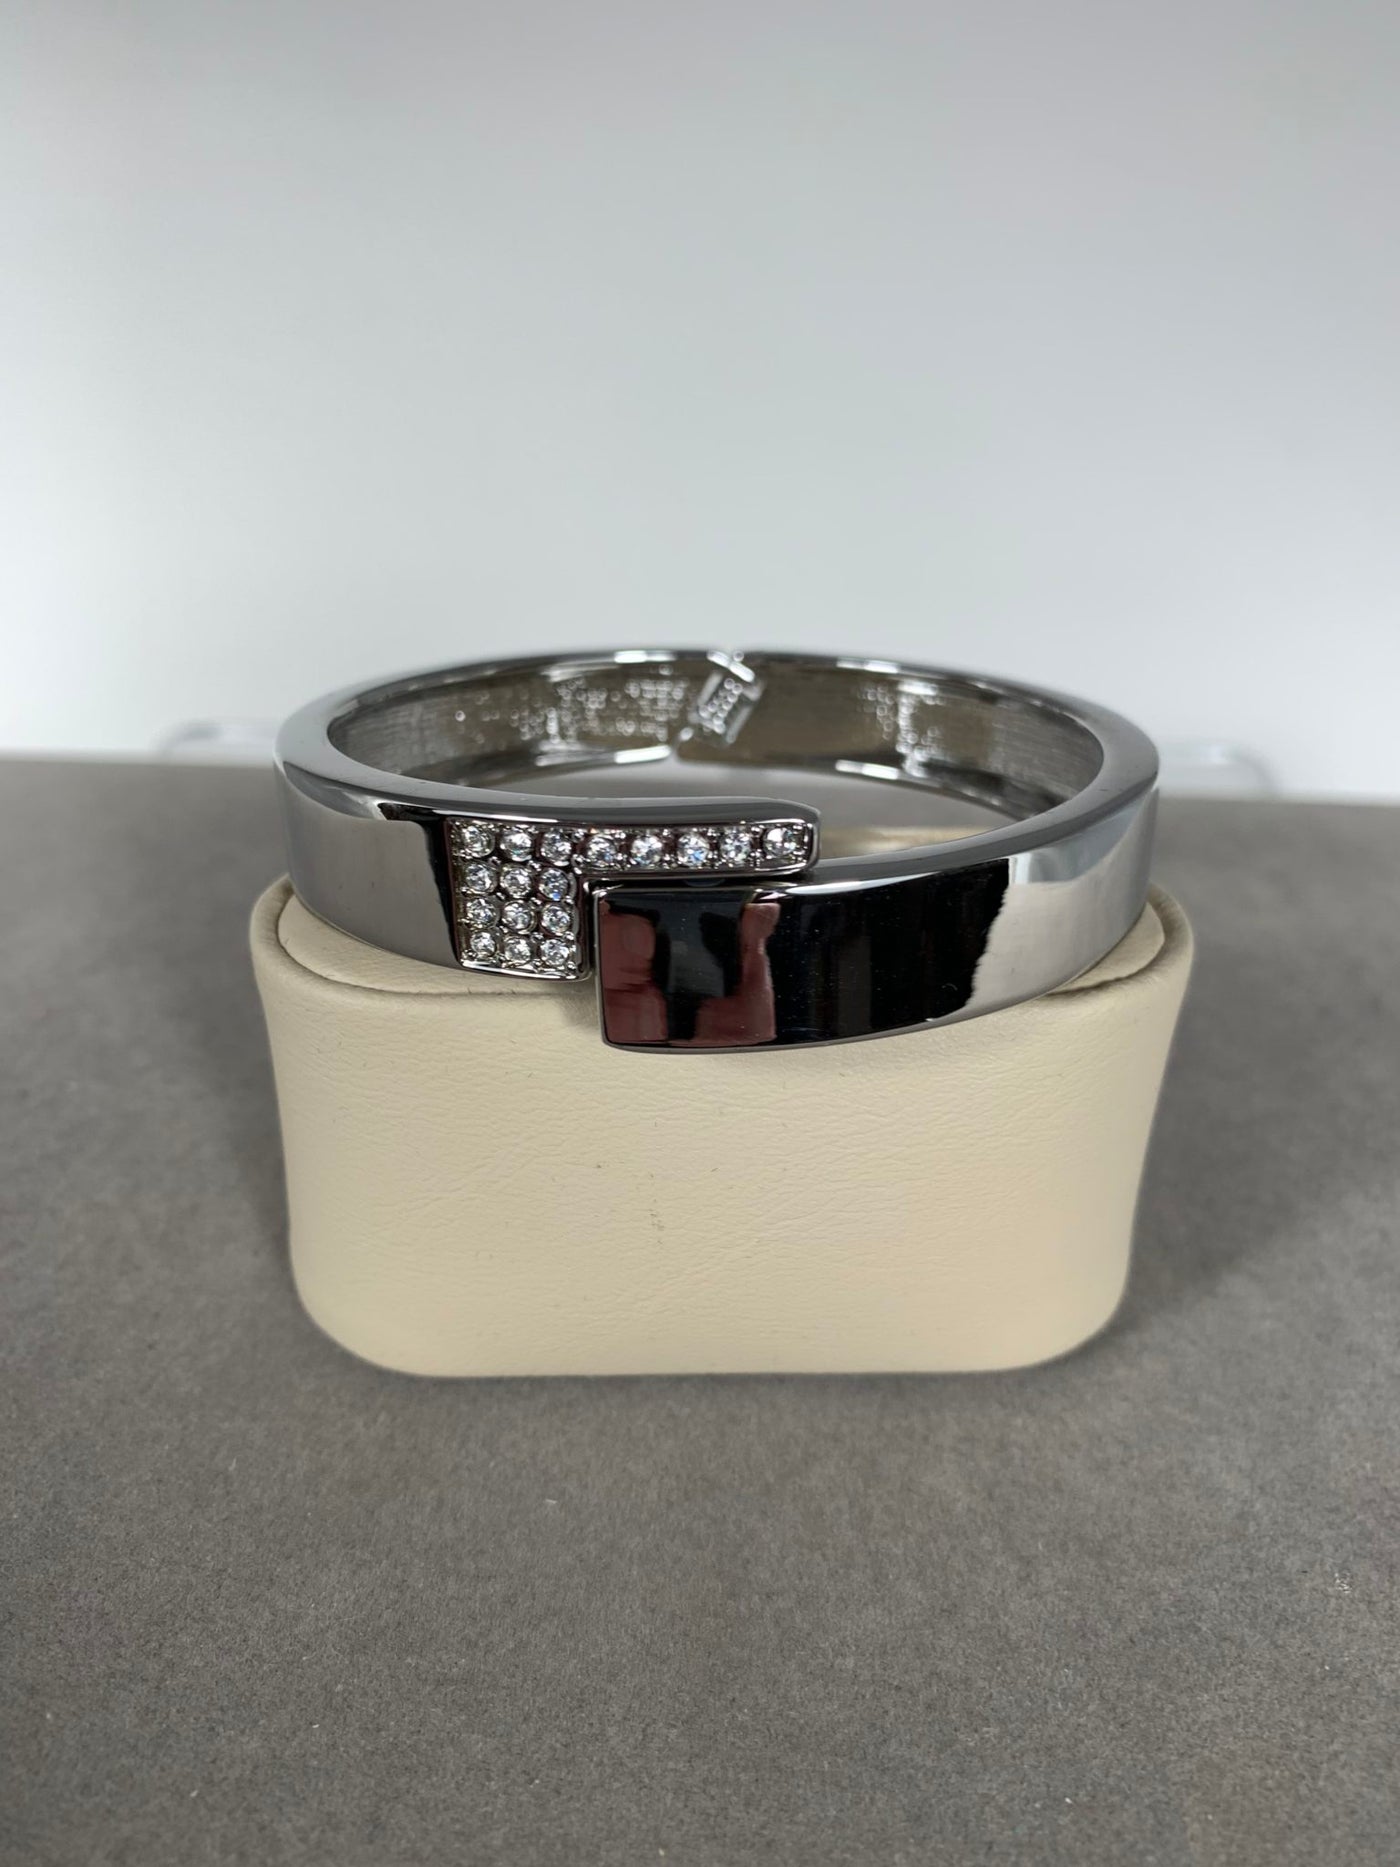 Silver Tone Bangle with Shiny Crystal Accent